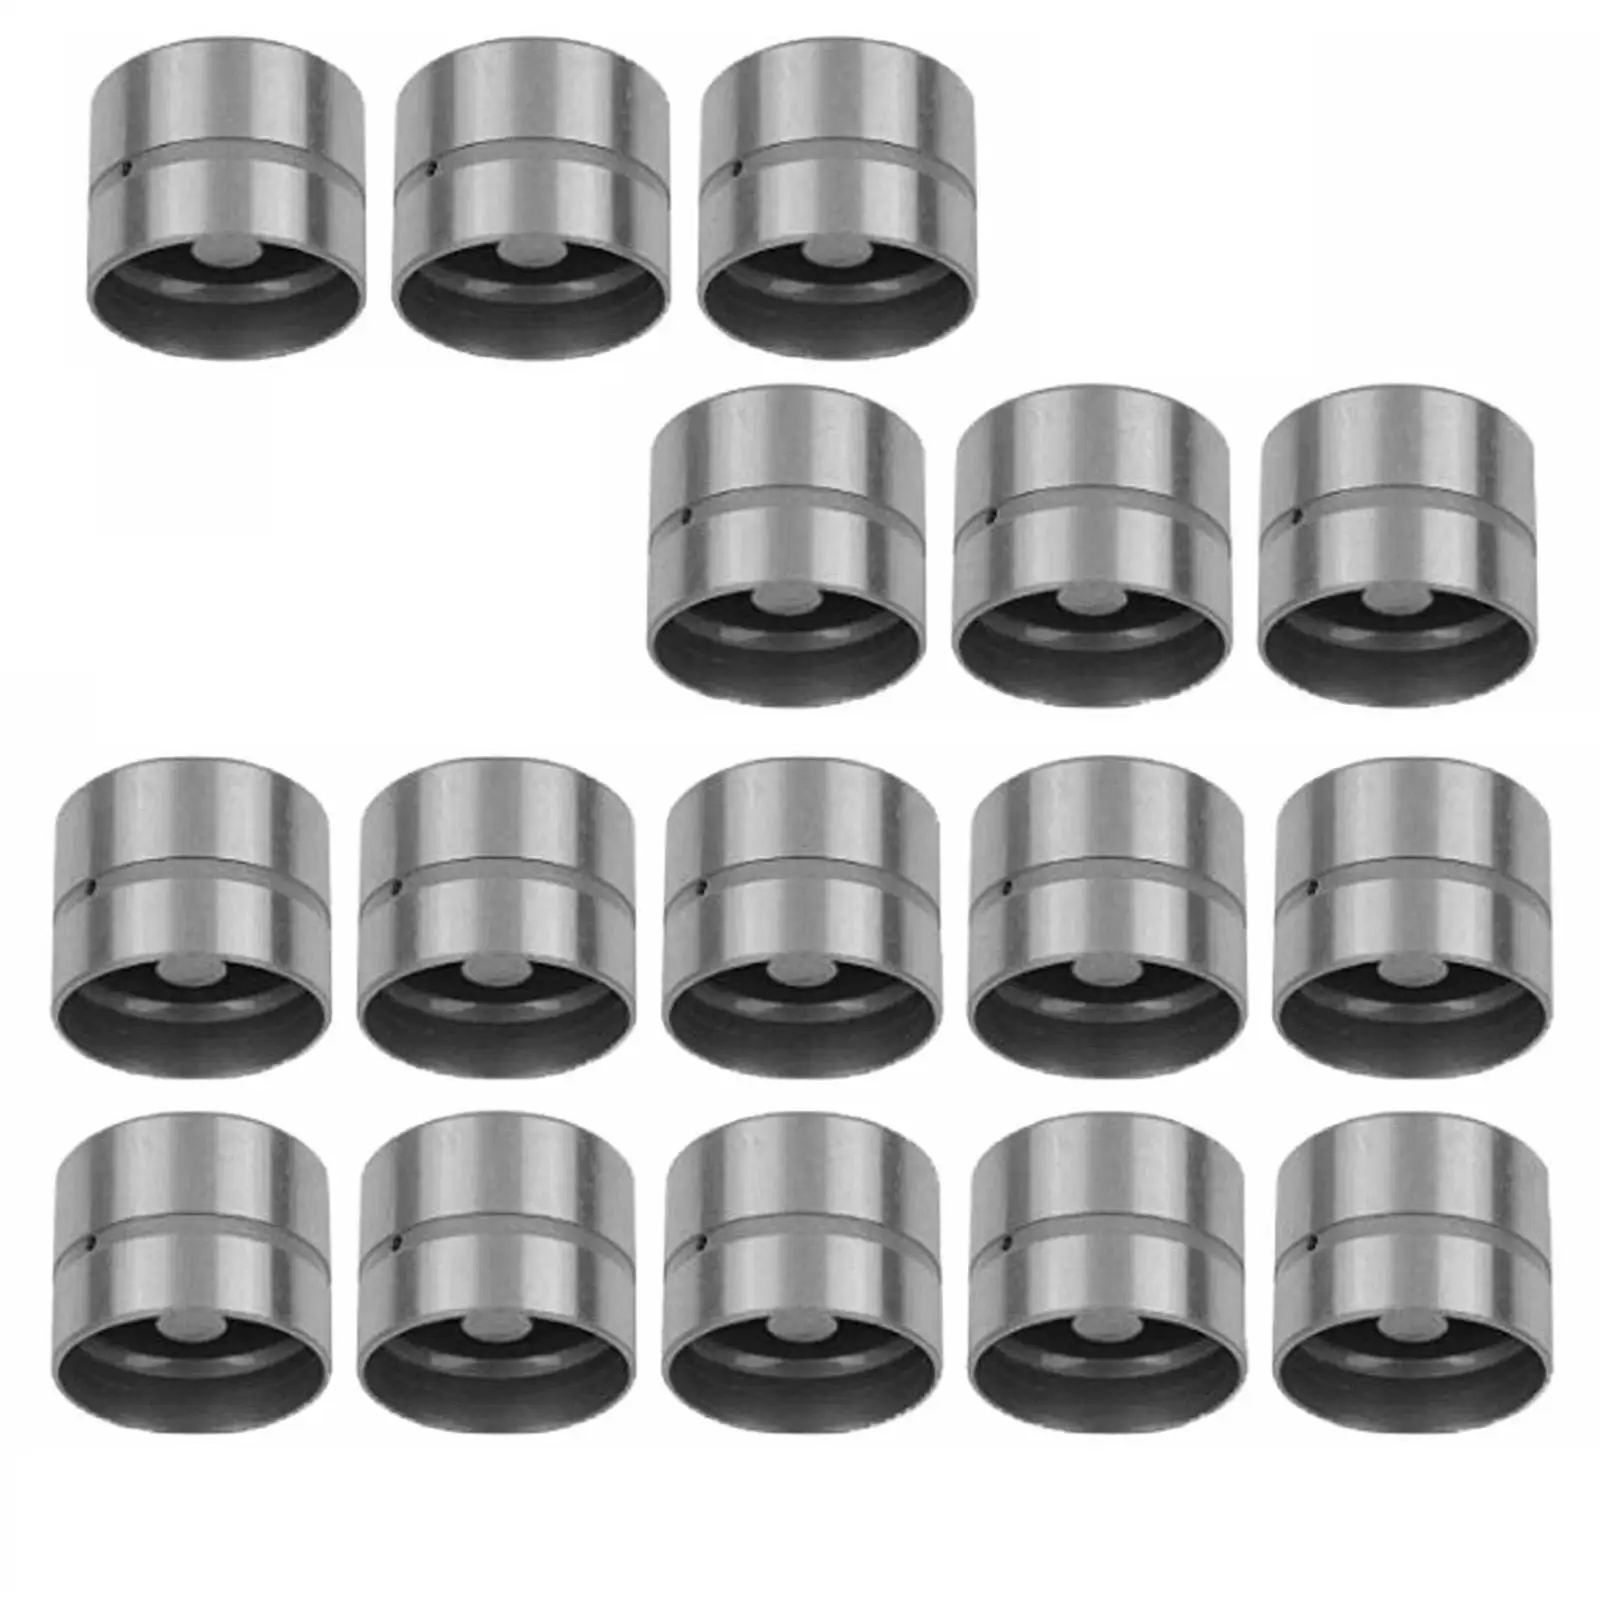 16Pcs Hydraulic Lifters Tappets Direct Replaces Spare  for 20XE C20XE C20Let x20Xev 42001180570967 85000600